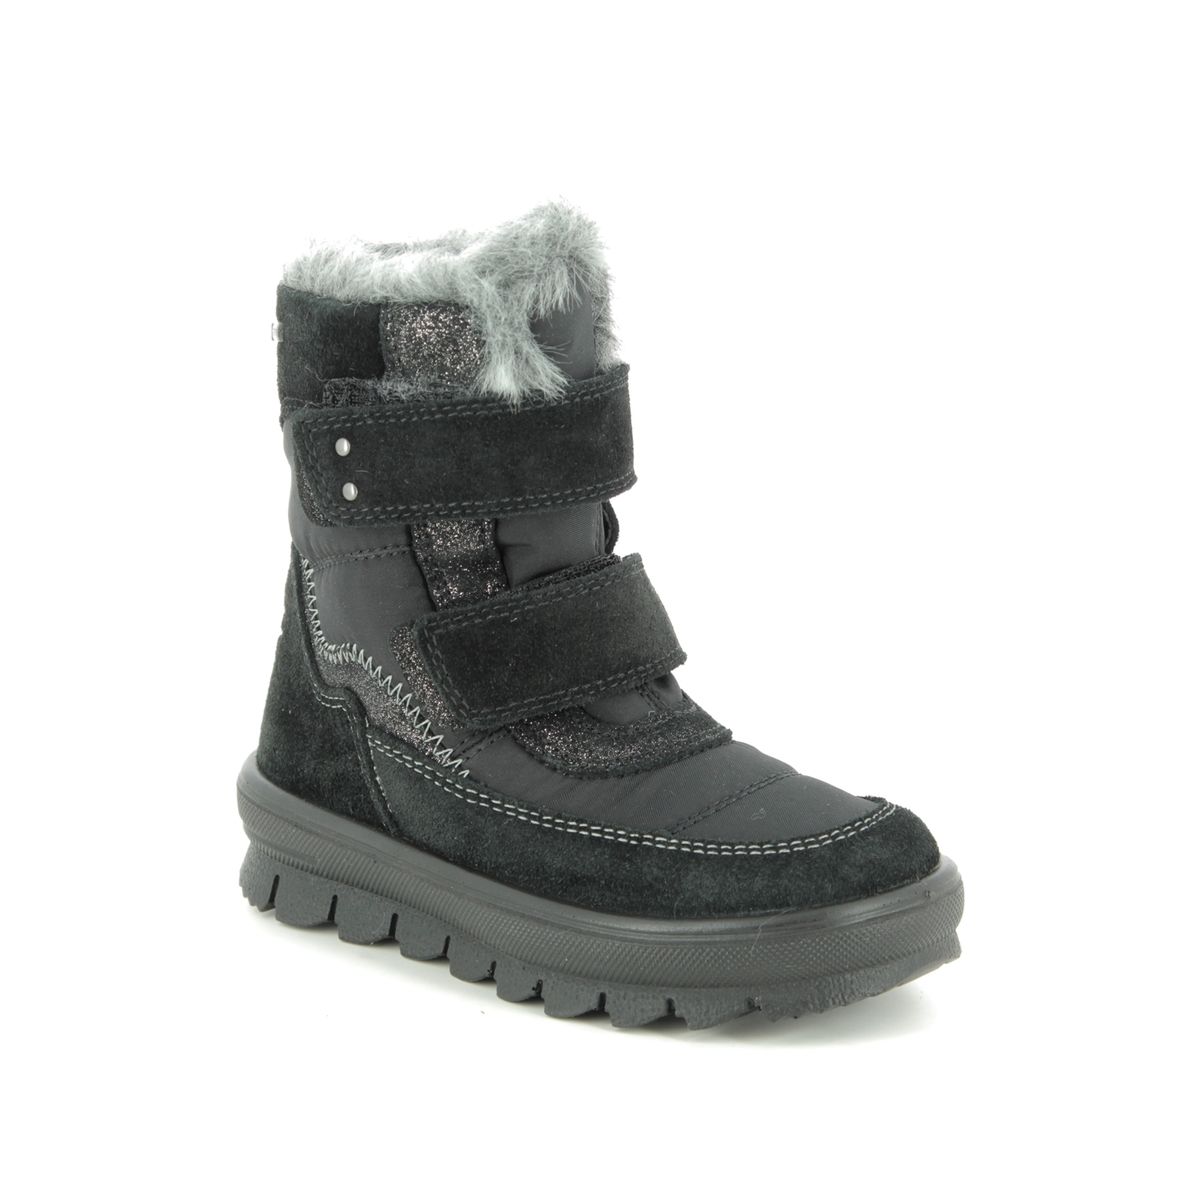 Superfit Flavia Vel Gtx Black Suede Kids Toddler Girls Boots 09214-00 In Size 34 In Plain Black Suede For kids